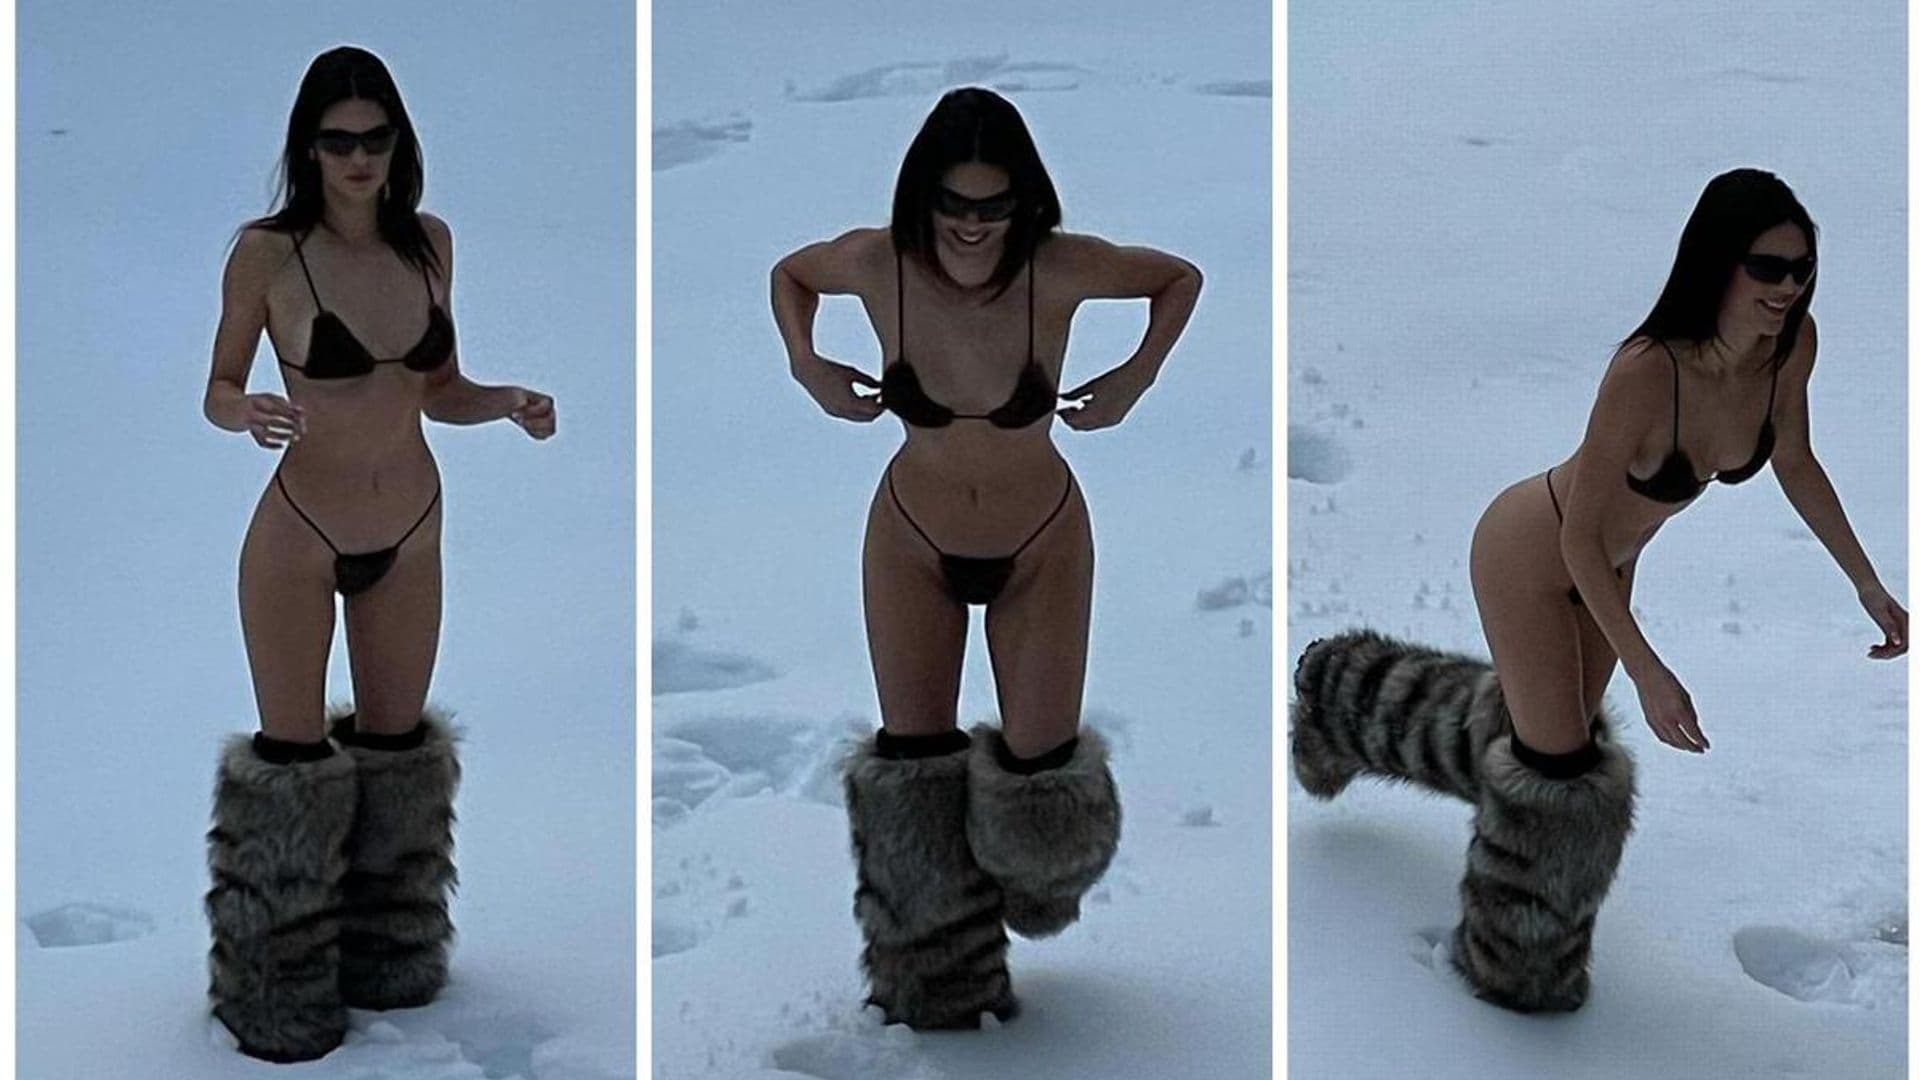 Kendall Jenner wears an itty bitty bikini in the show after showing off her snowboarding skills